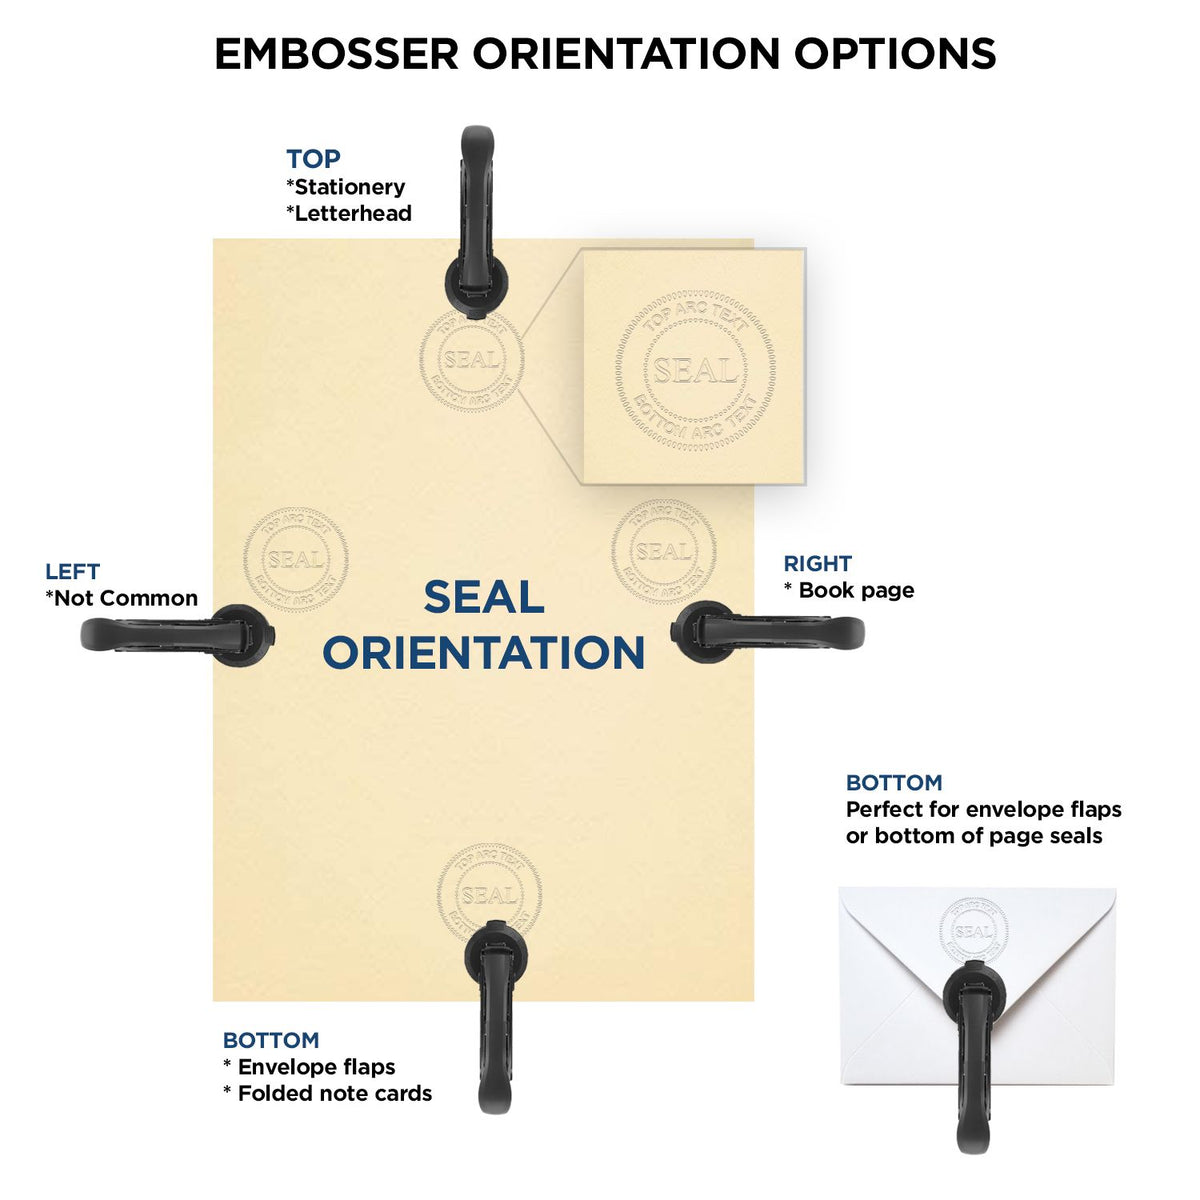 An infographic for the Long Reach Idaho Land Surveyor Seal showing embosser orientation, this is showing examples of a top, bottom, right and left insert.